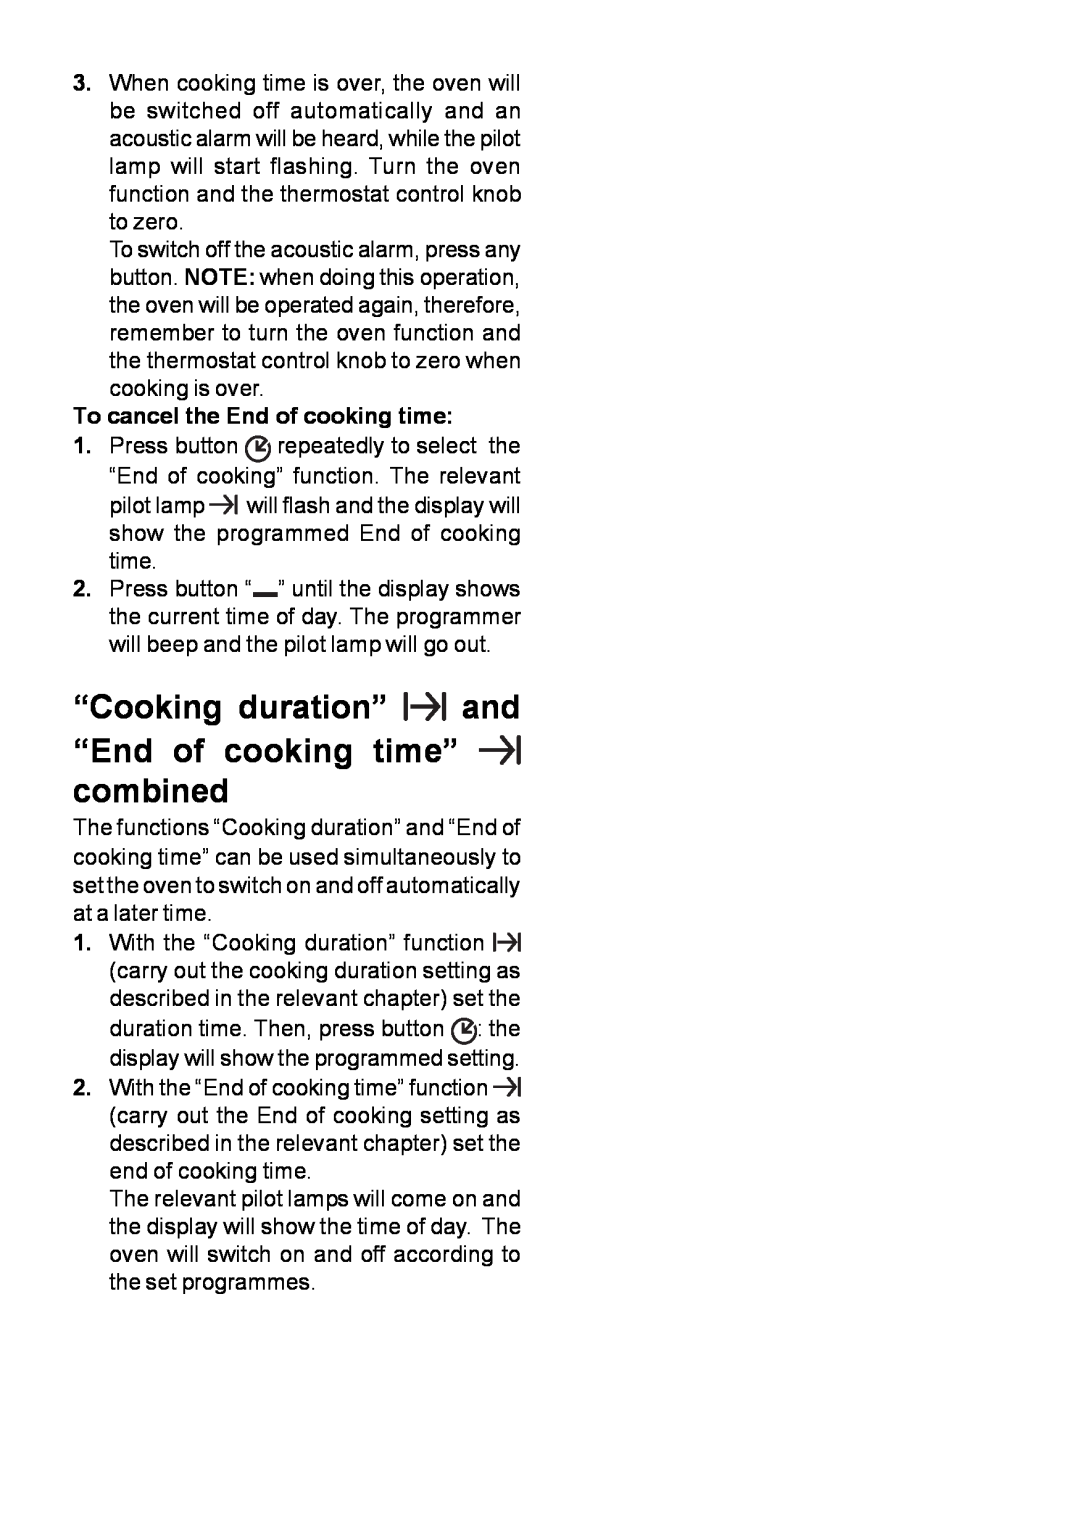 Moffat MSF 615 manual To cancel the End of cooking time 